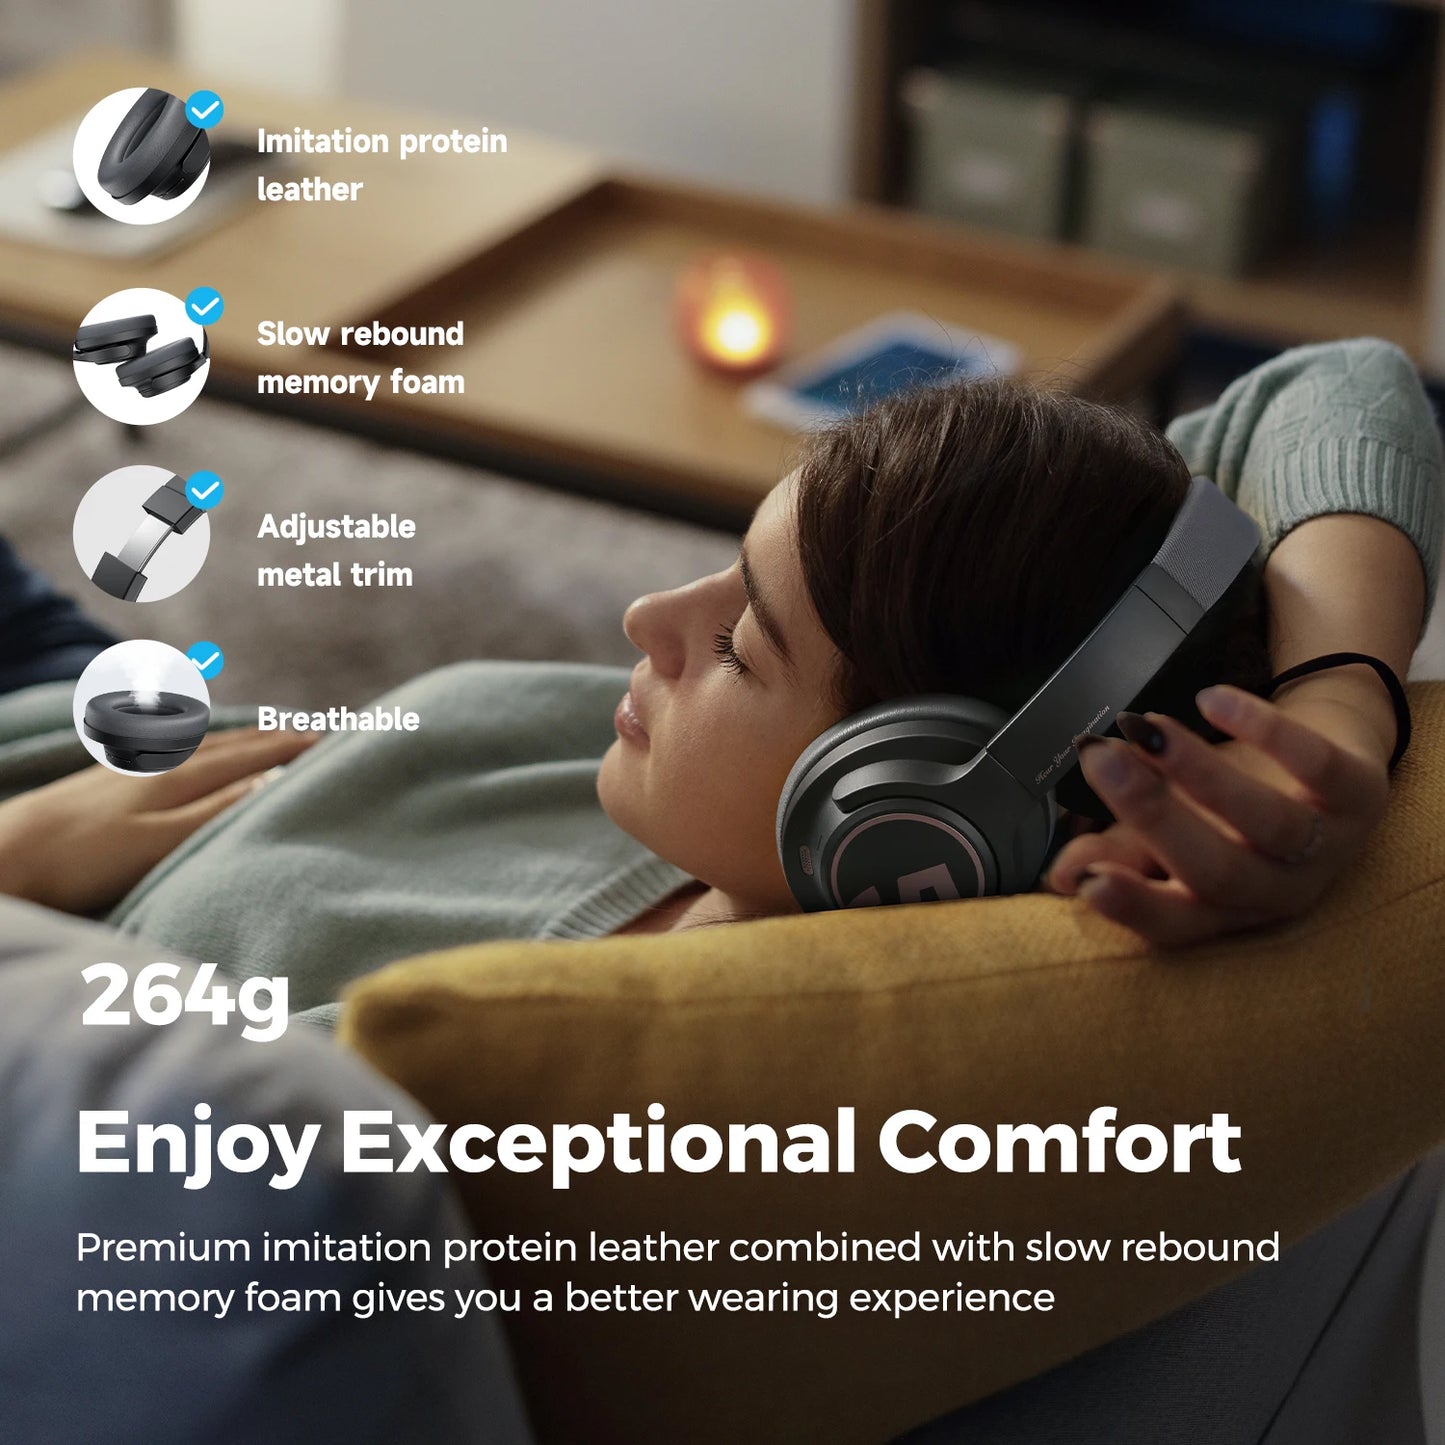 Space Headphones Bluetooth 5.3 Hybrid Active Noise Cancelling Wireless Headphone,123H Play,Mic,Multipoint Connection